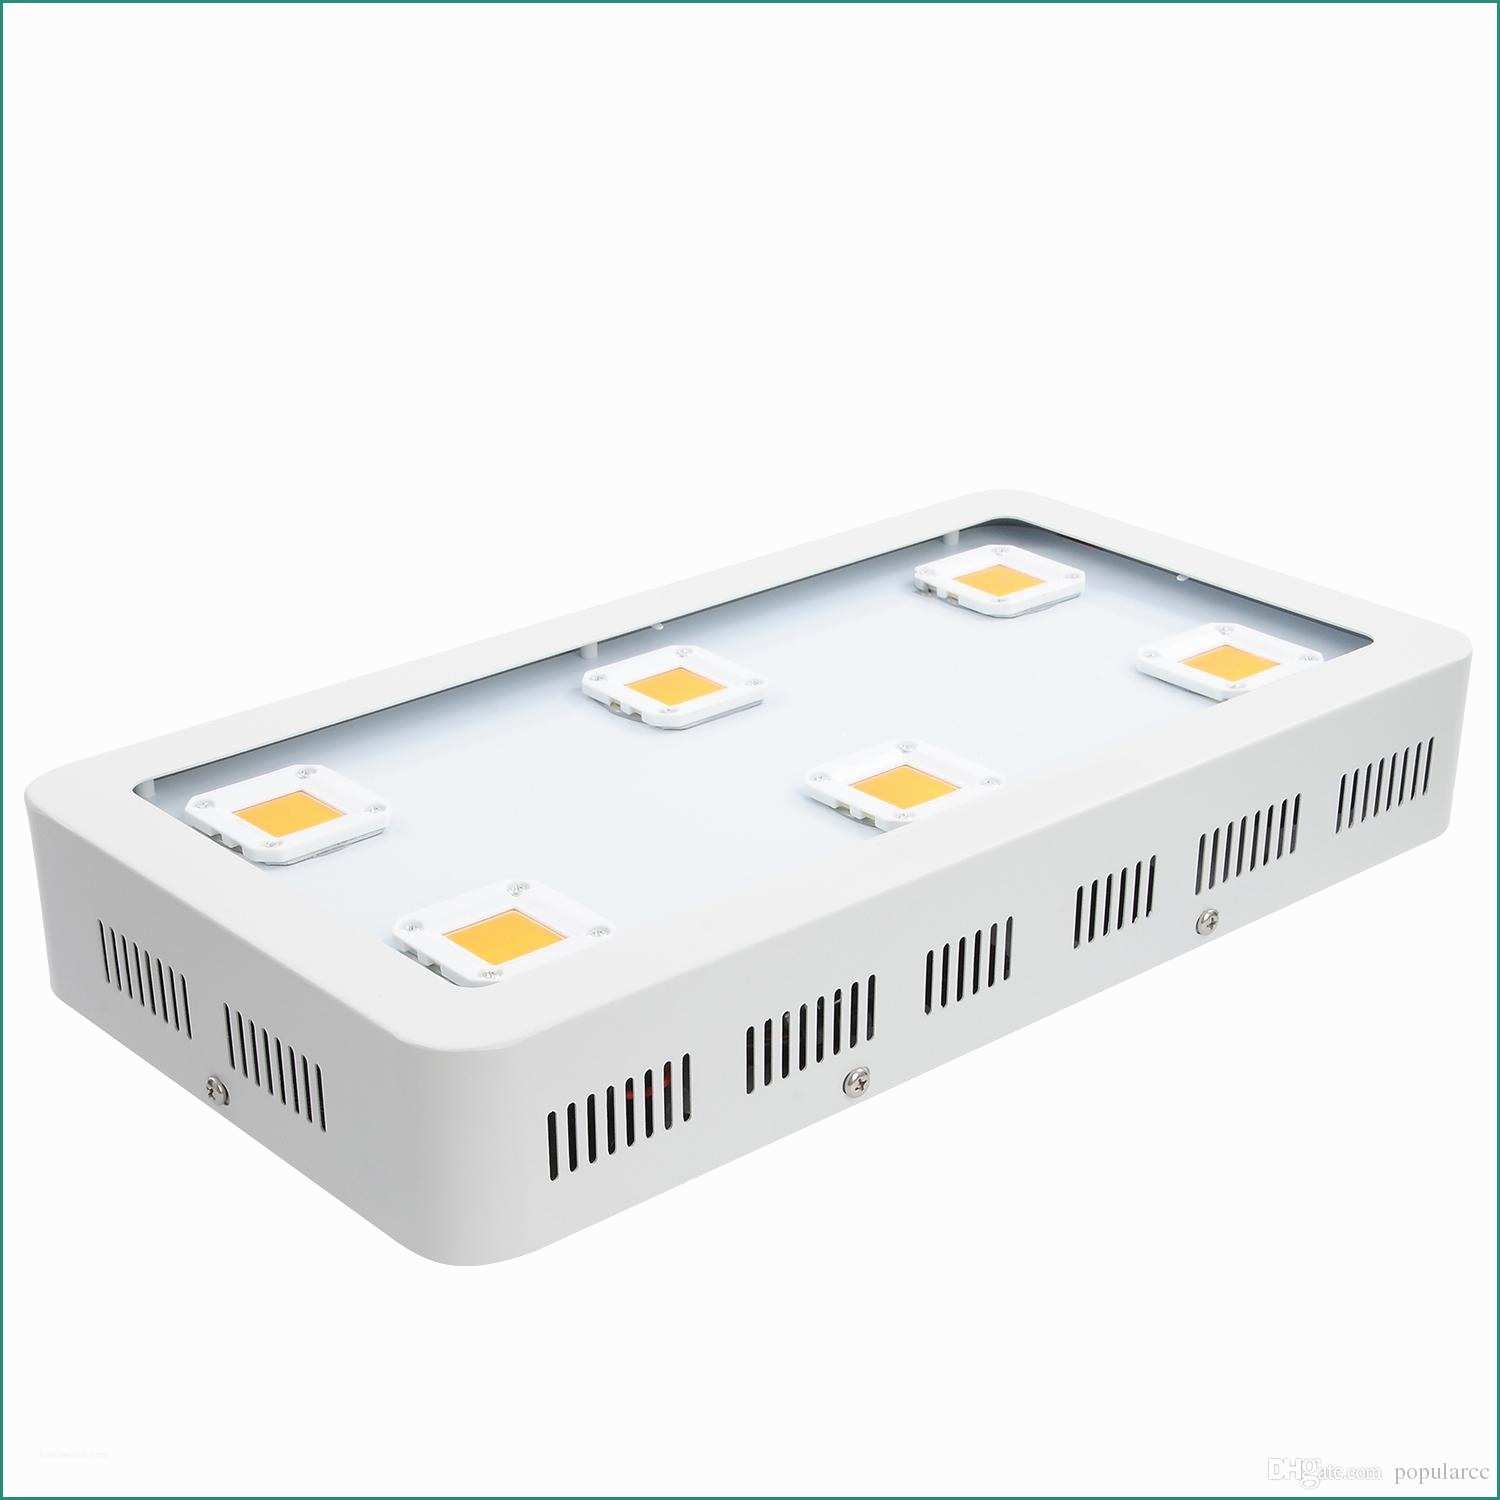 Lampada Led Rs Mm Dimmerabile E 1800w Cob Led Grow Light Full Spectrum 410 780nm Armed with